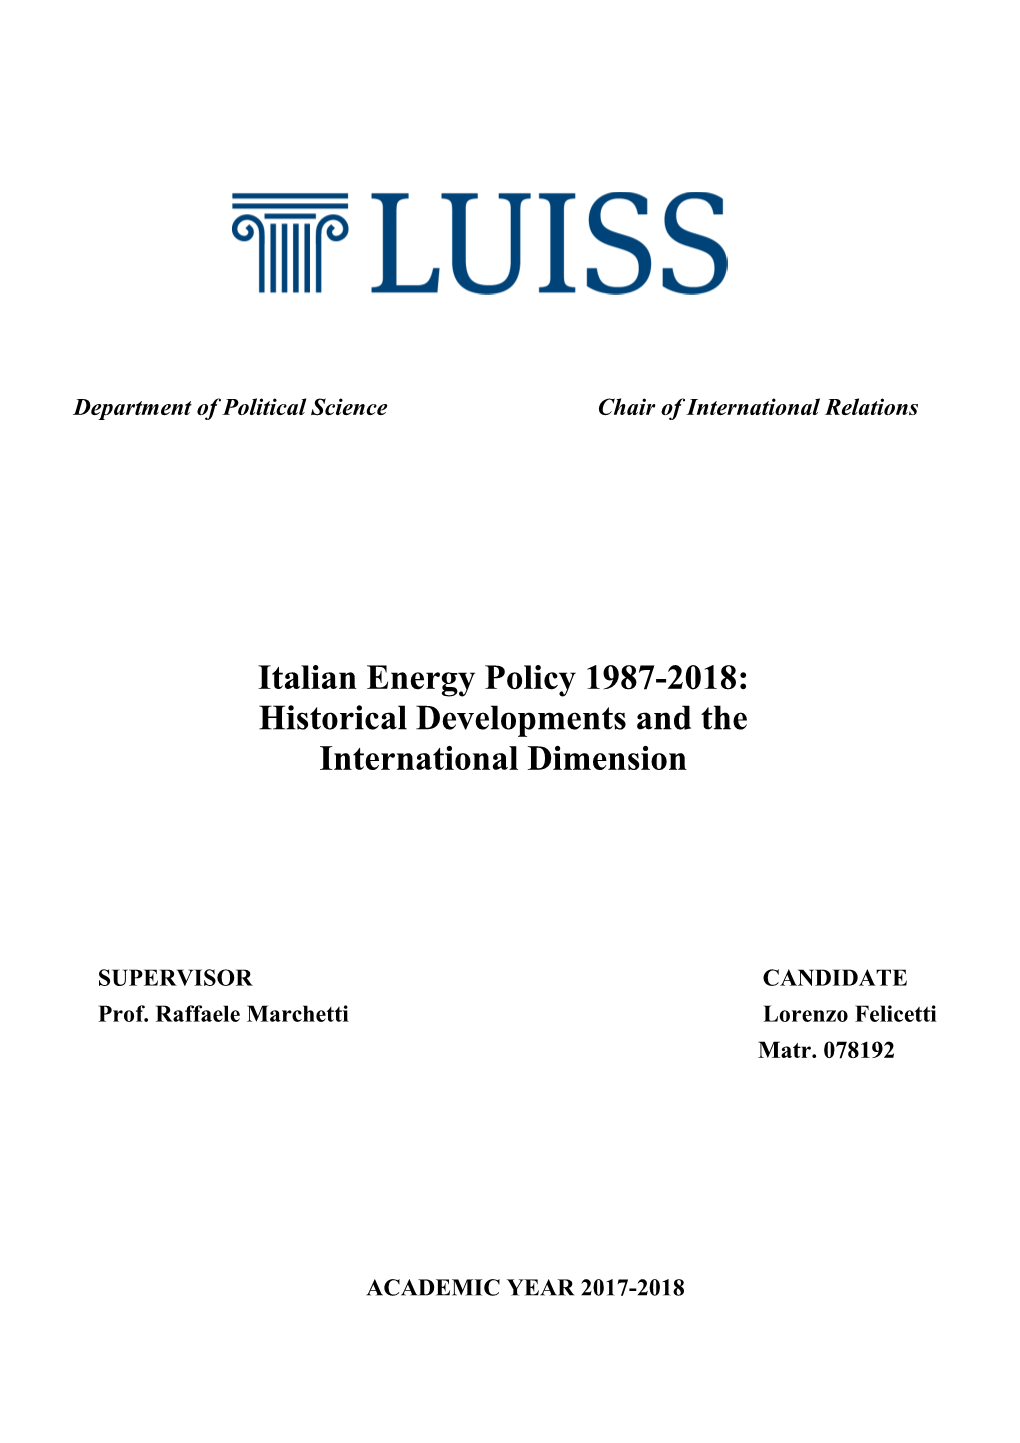 Italian Energy Policy 1987-2018: Historical Developments and the International Dimension